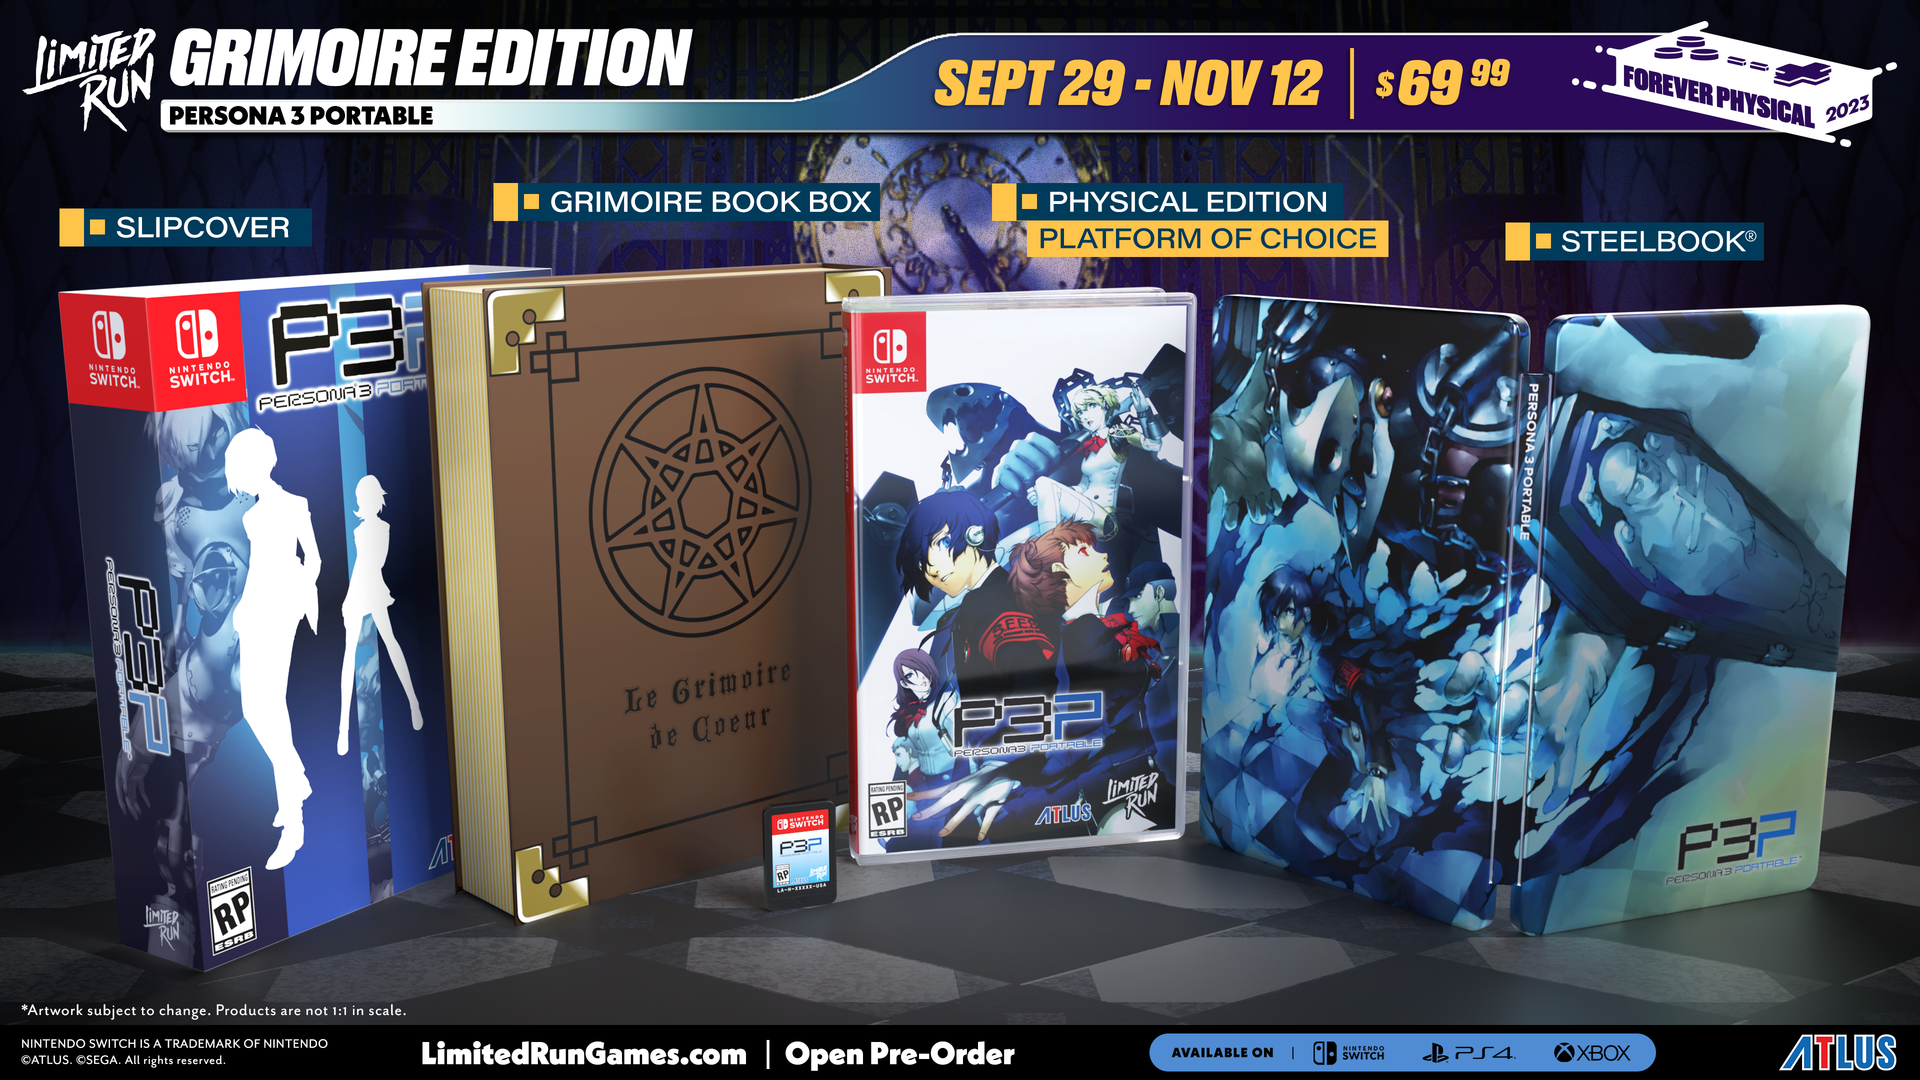 Persona3Portable_MockUp_Market_Banner_Grimoire_SWITCH.png